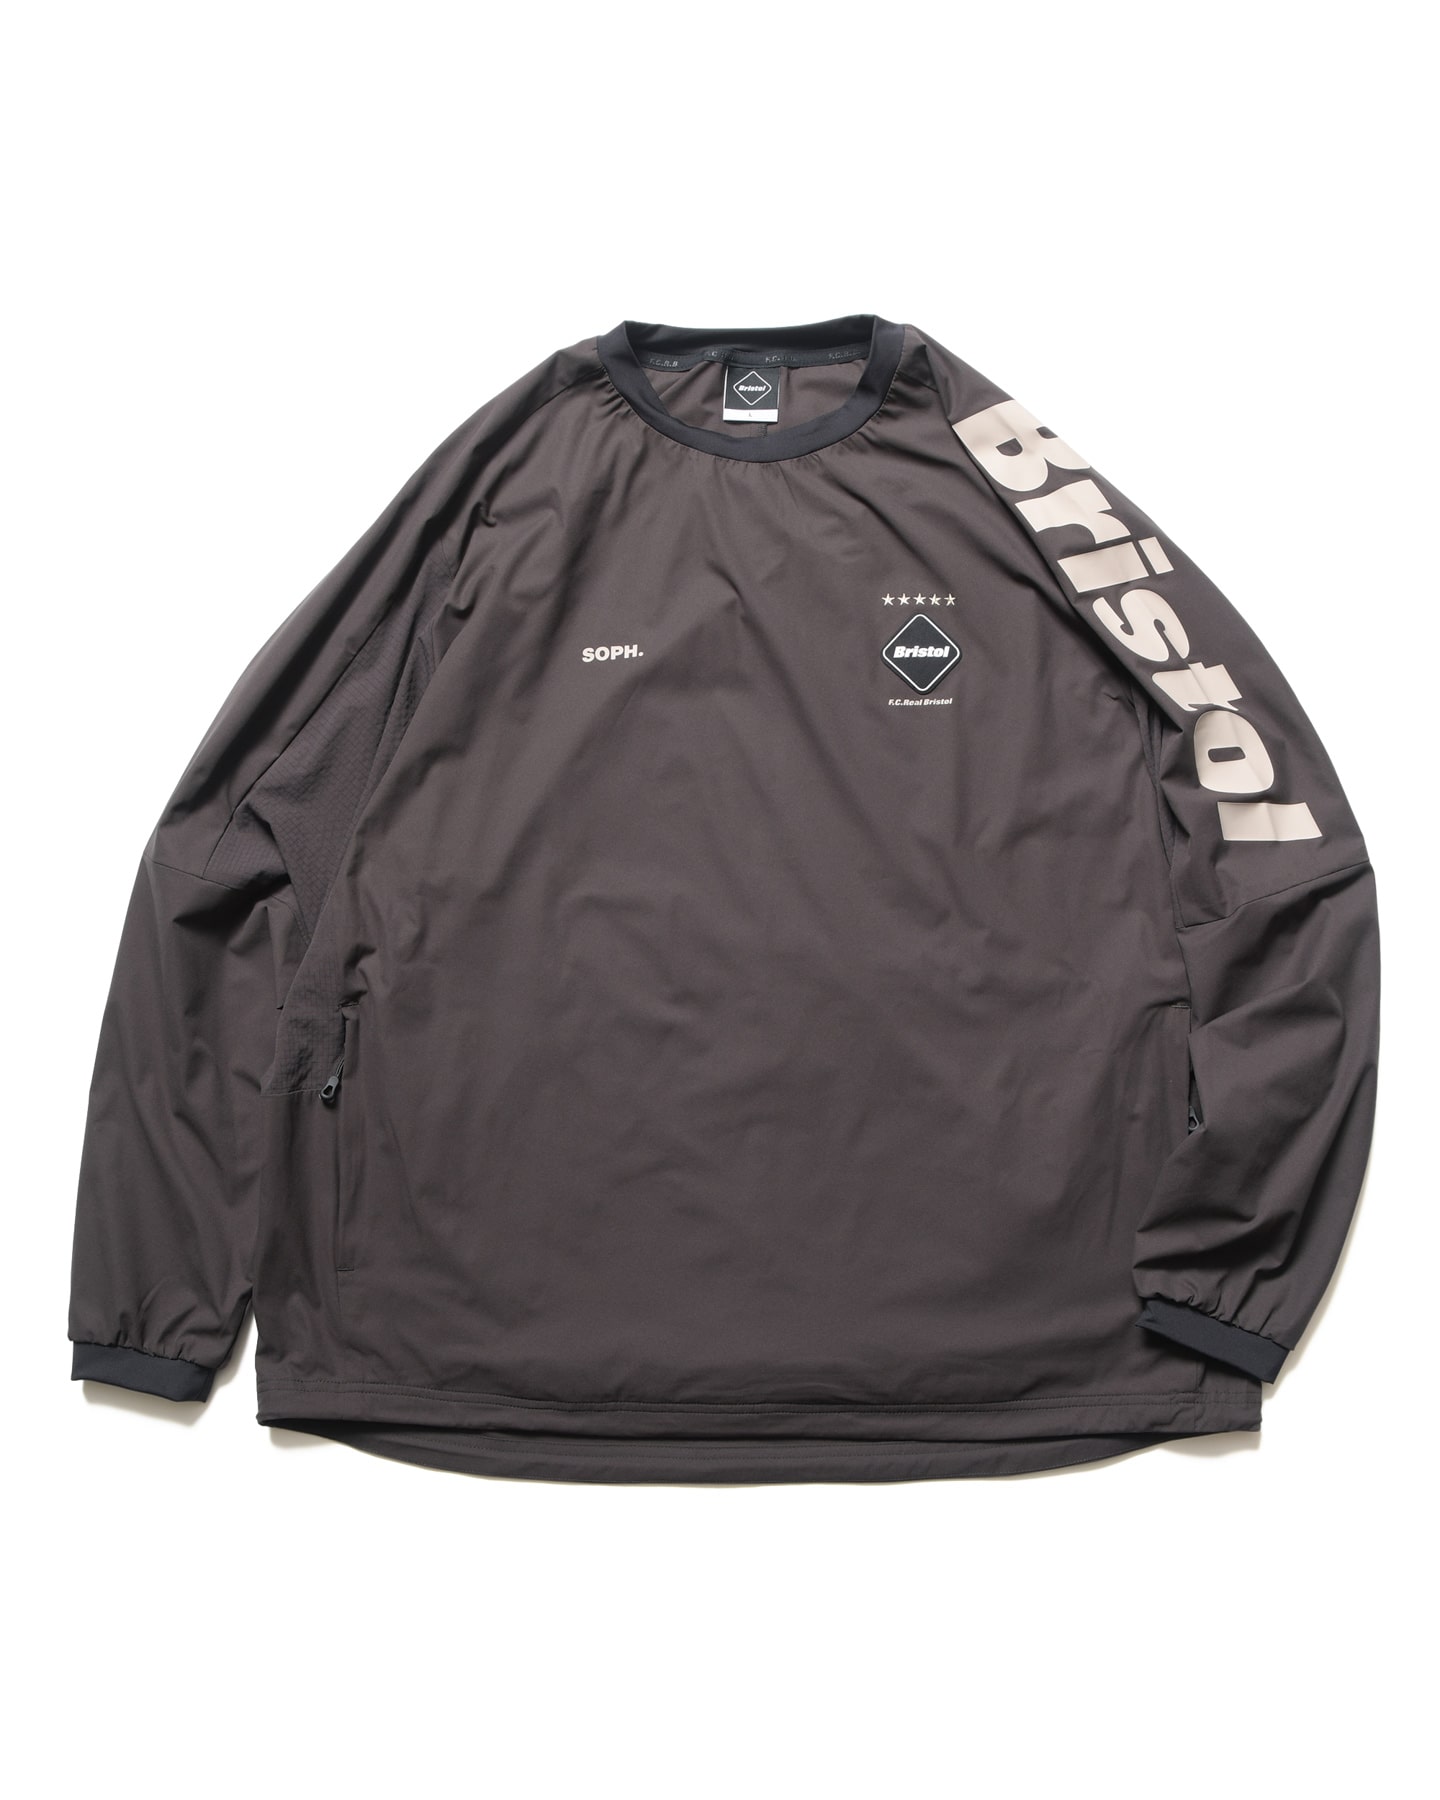 fcrb 23ss 3layer piste 黒 M 正規品 ピステ